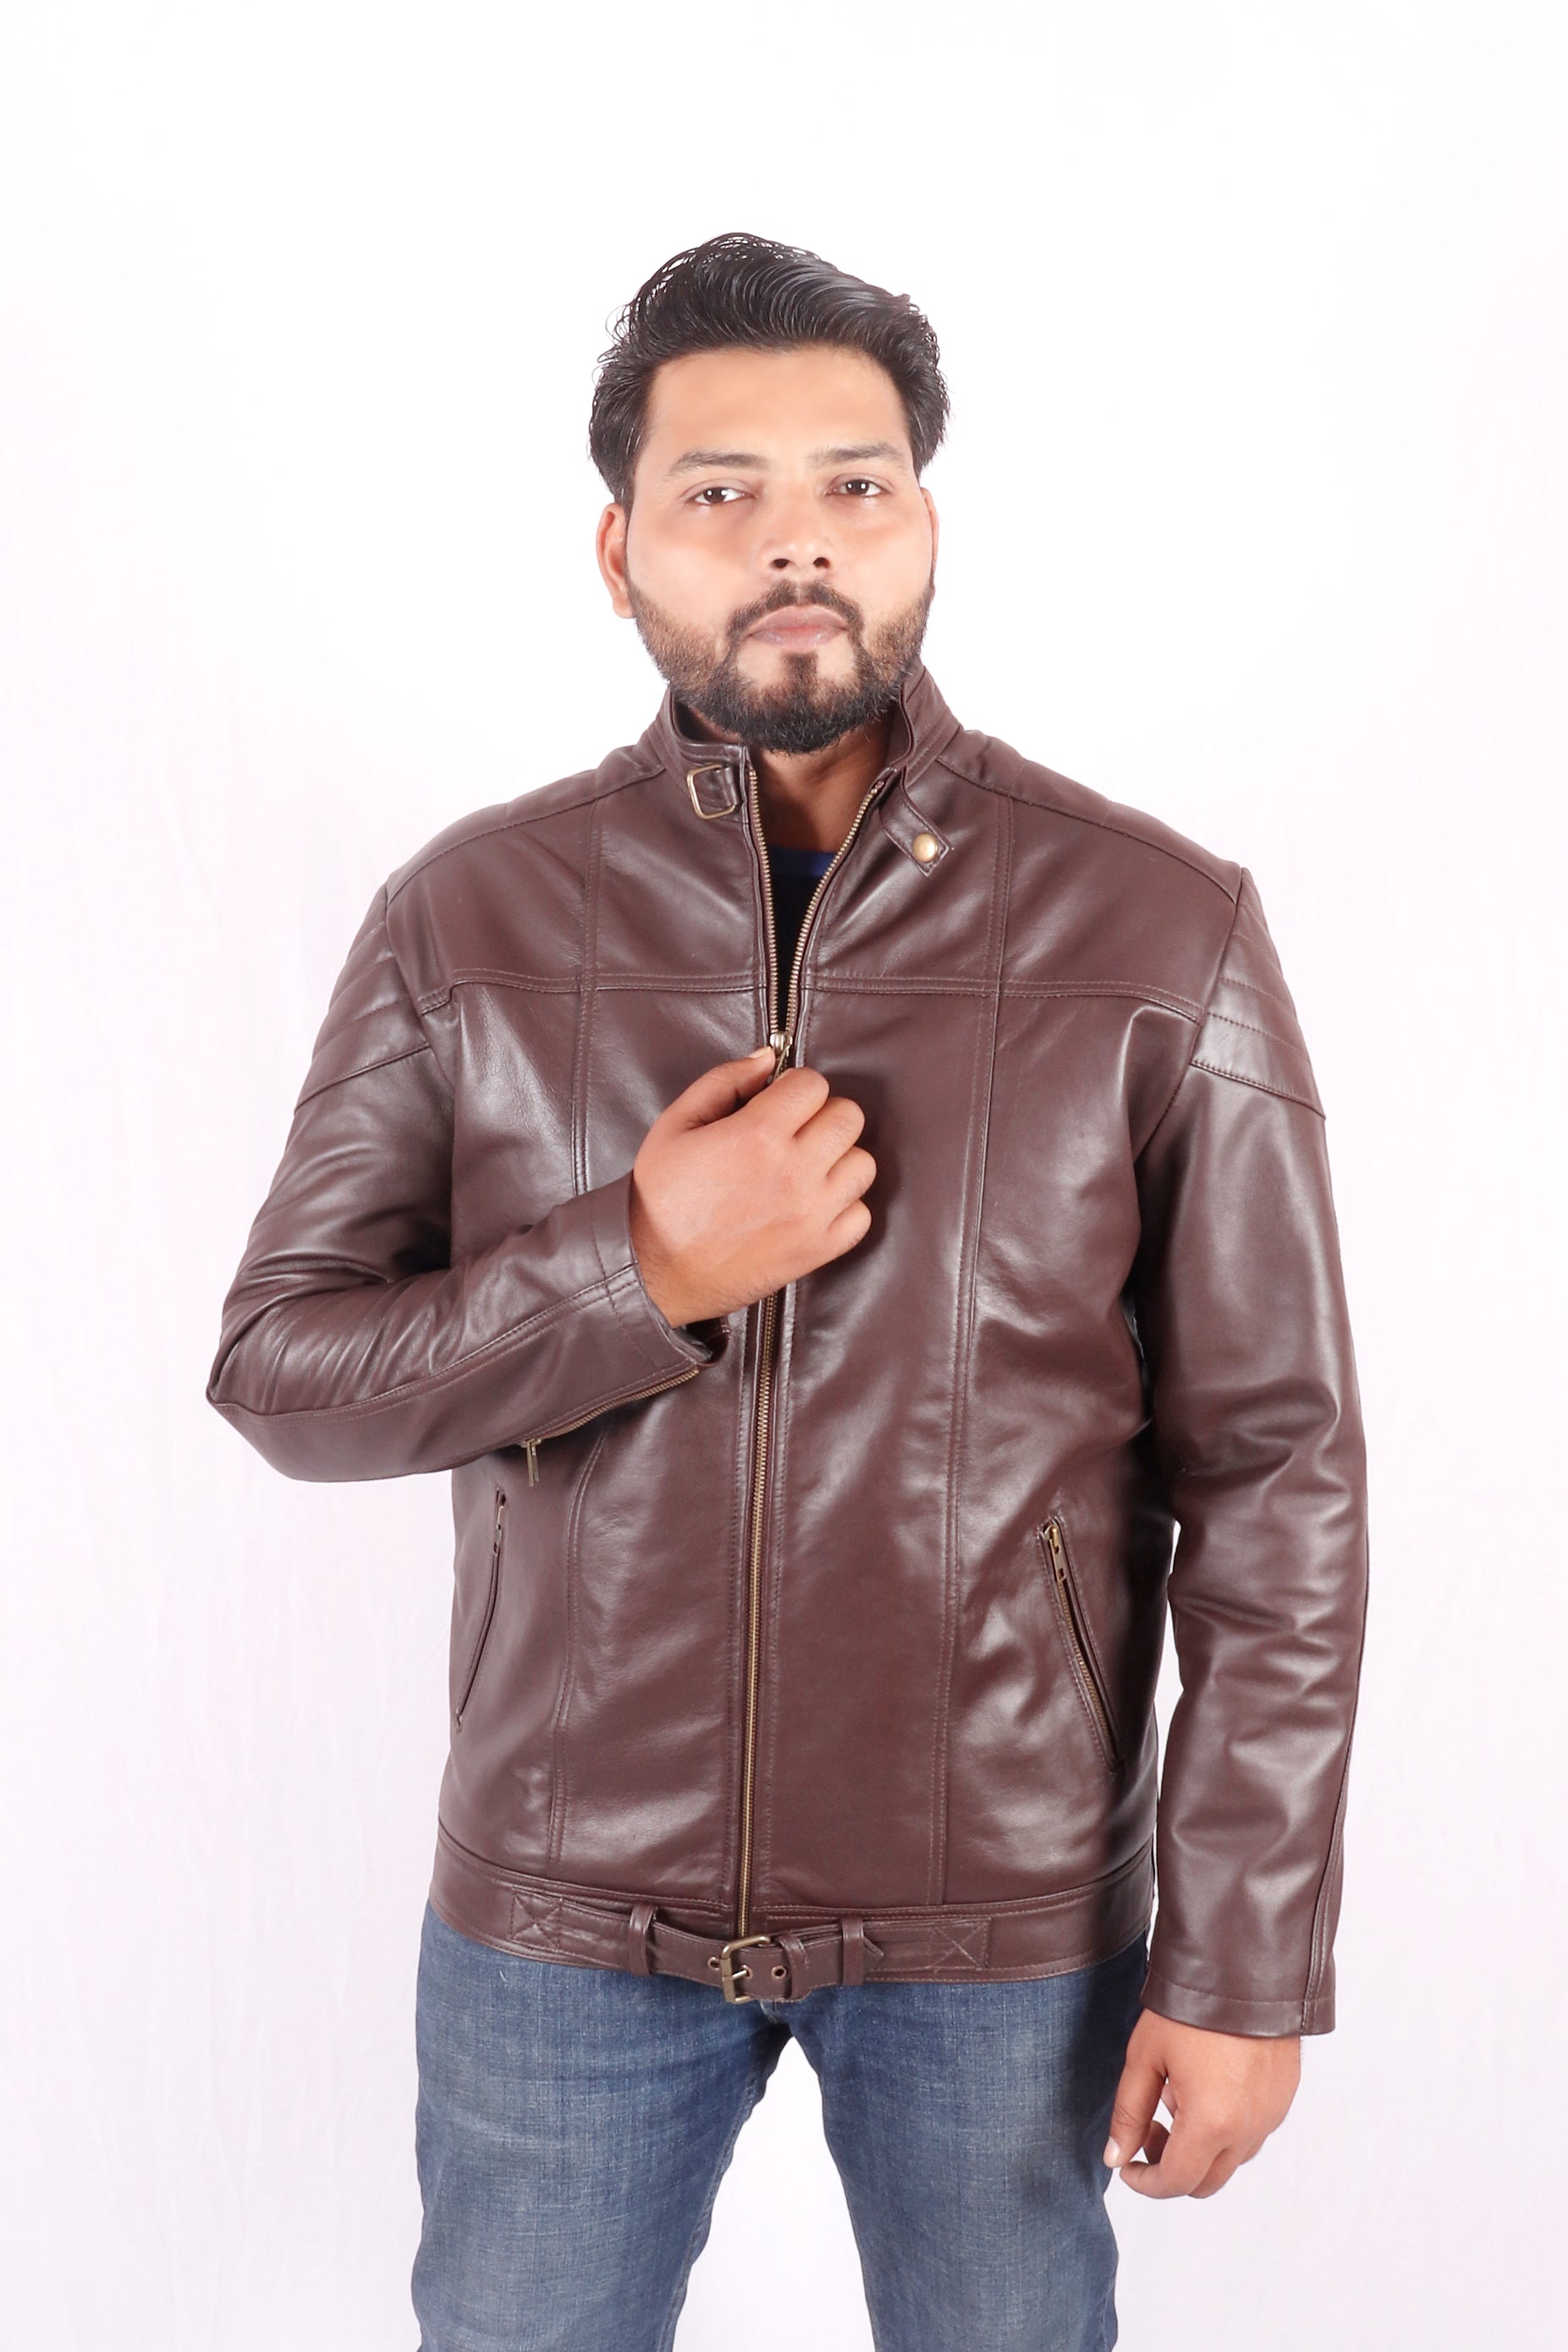 KC Collections CLASSIC BIKER Genuine LEATHER JACKET Size Small - Made In  India | eBay